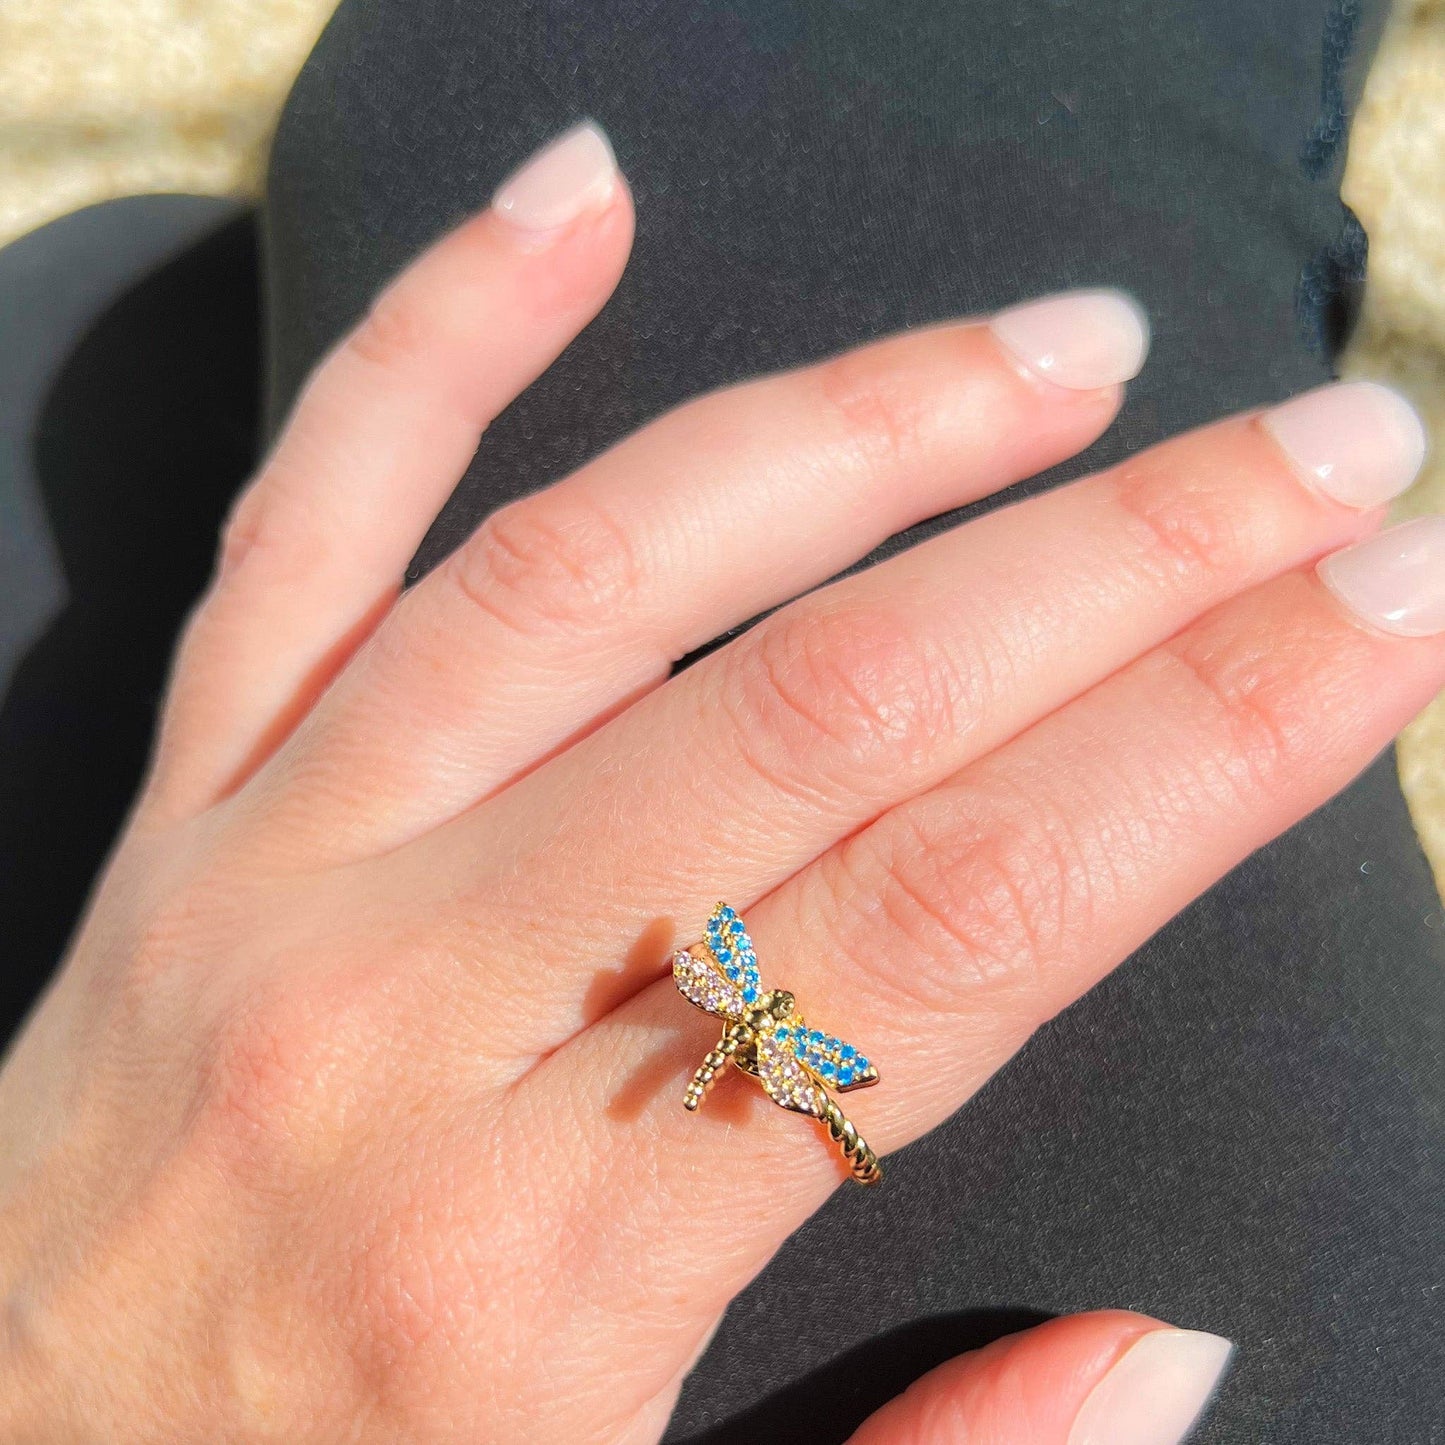 Dragonfly Anxiety Ring, Fidget Spinner Ring